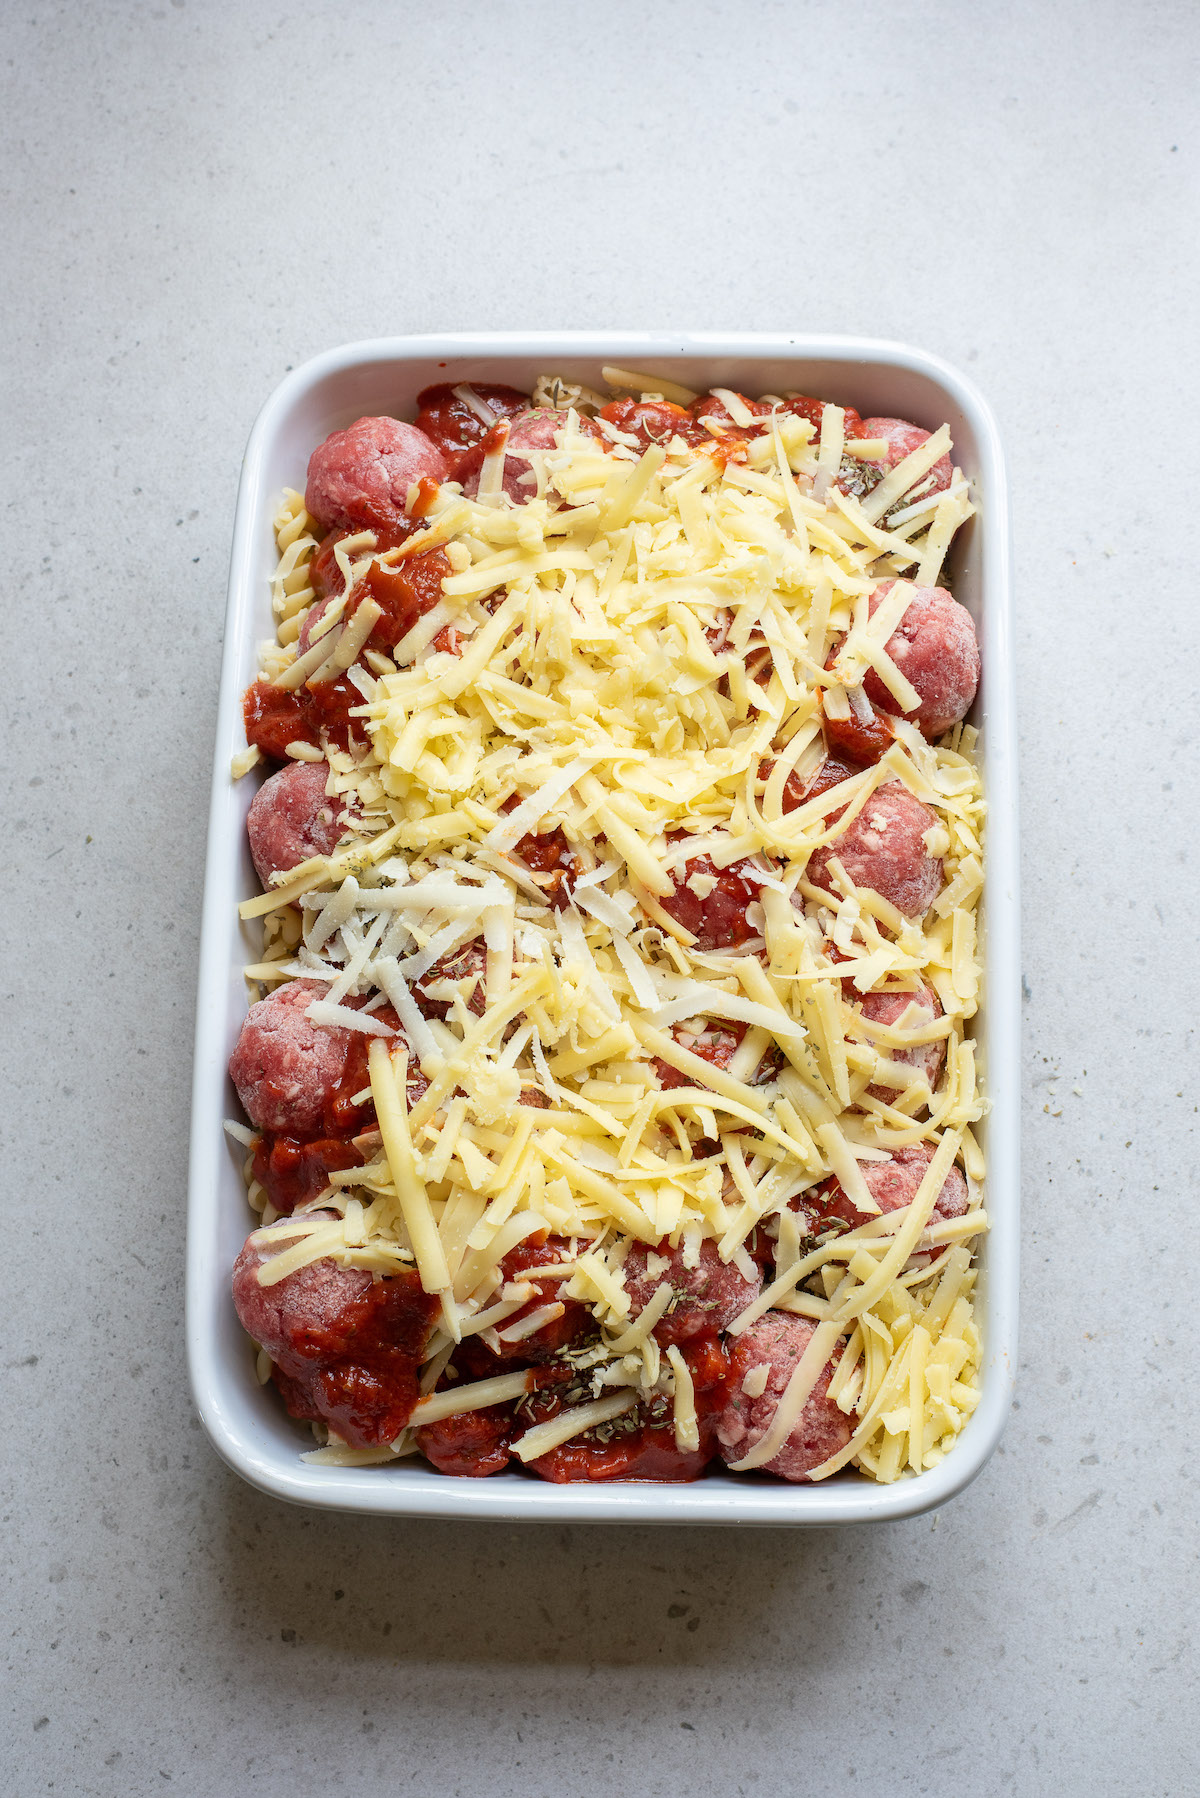 the casserole topped with cheese and ready to be baked